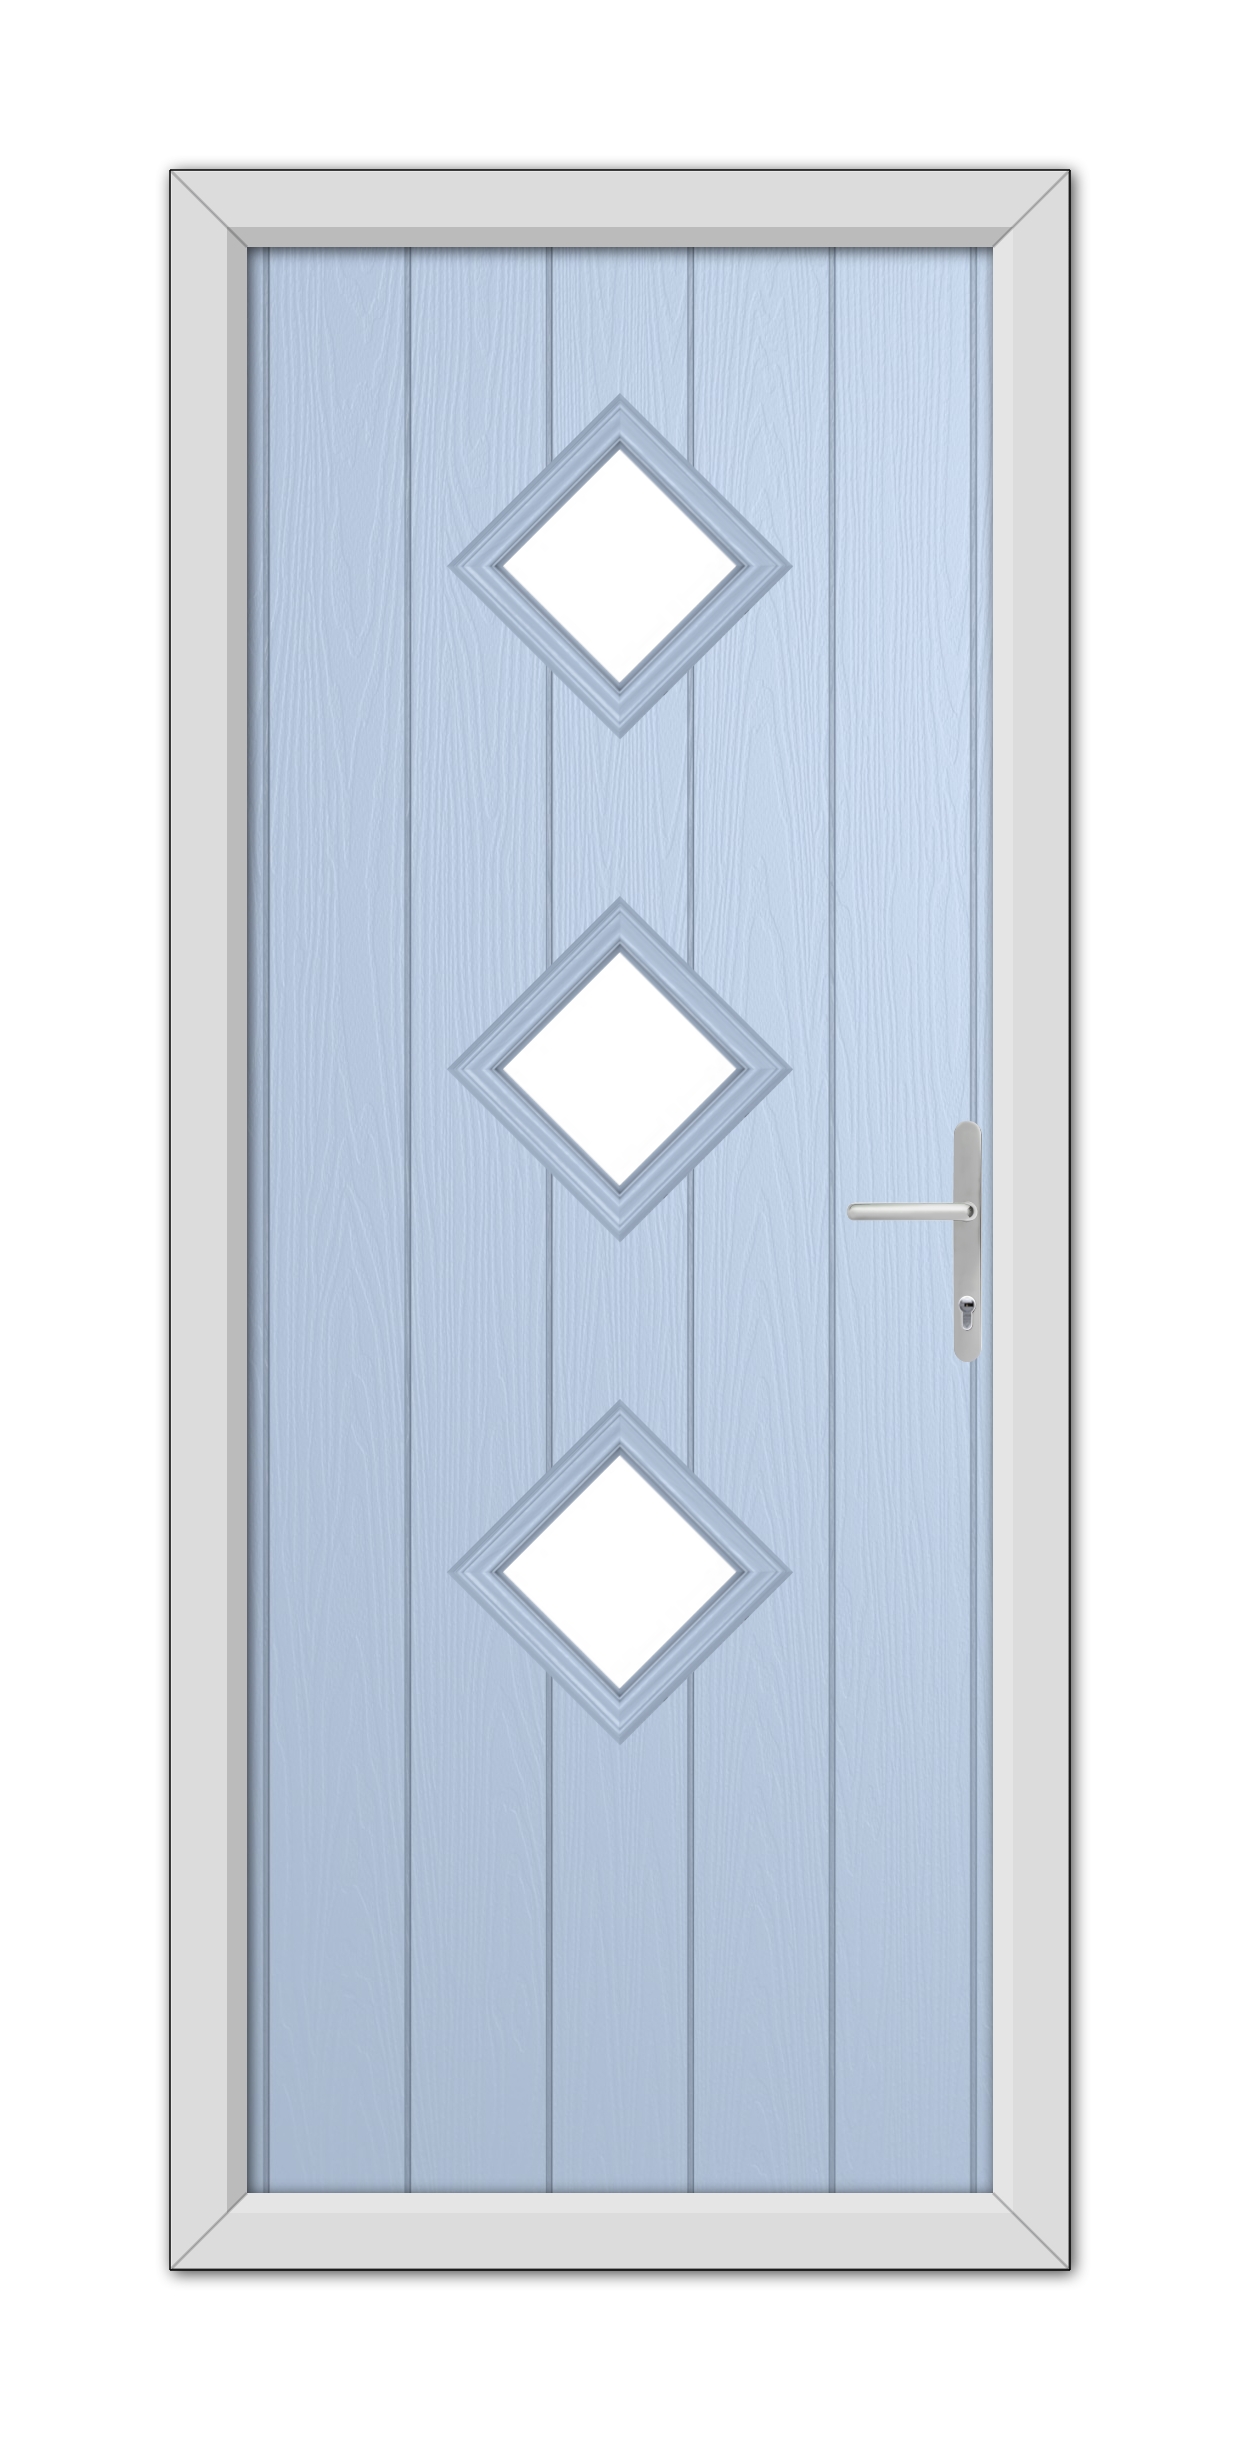 A Duck Egg Blue Richmond Composite Door 48mm Timber Core with a modern design featuring three diamond-shaped glass panels and a metallic handle on the right side.